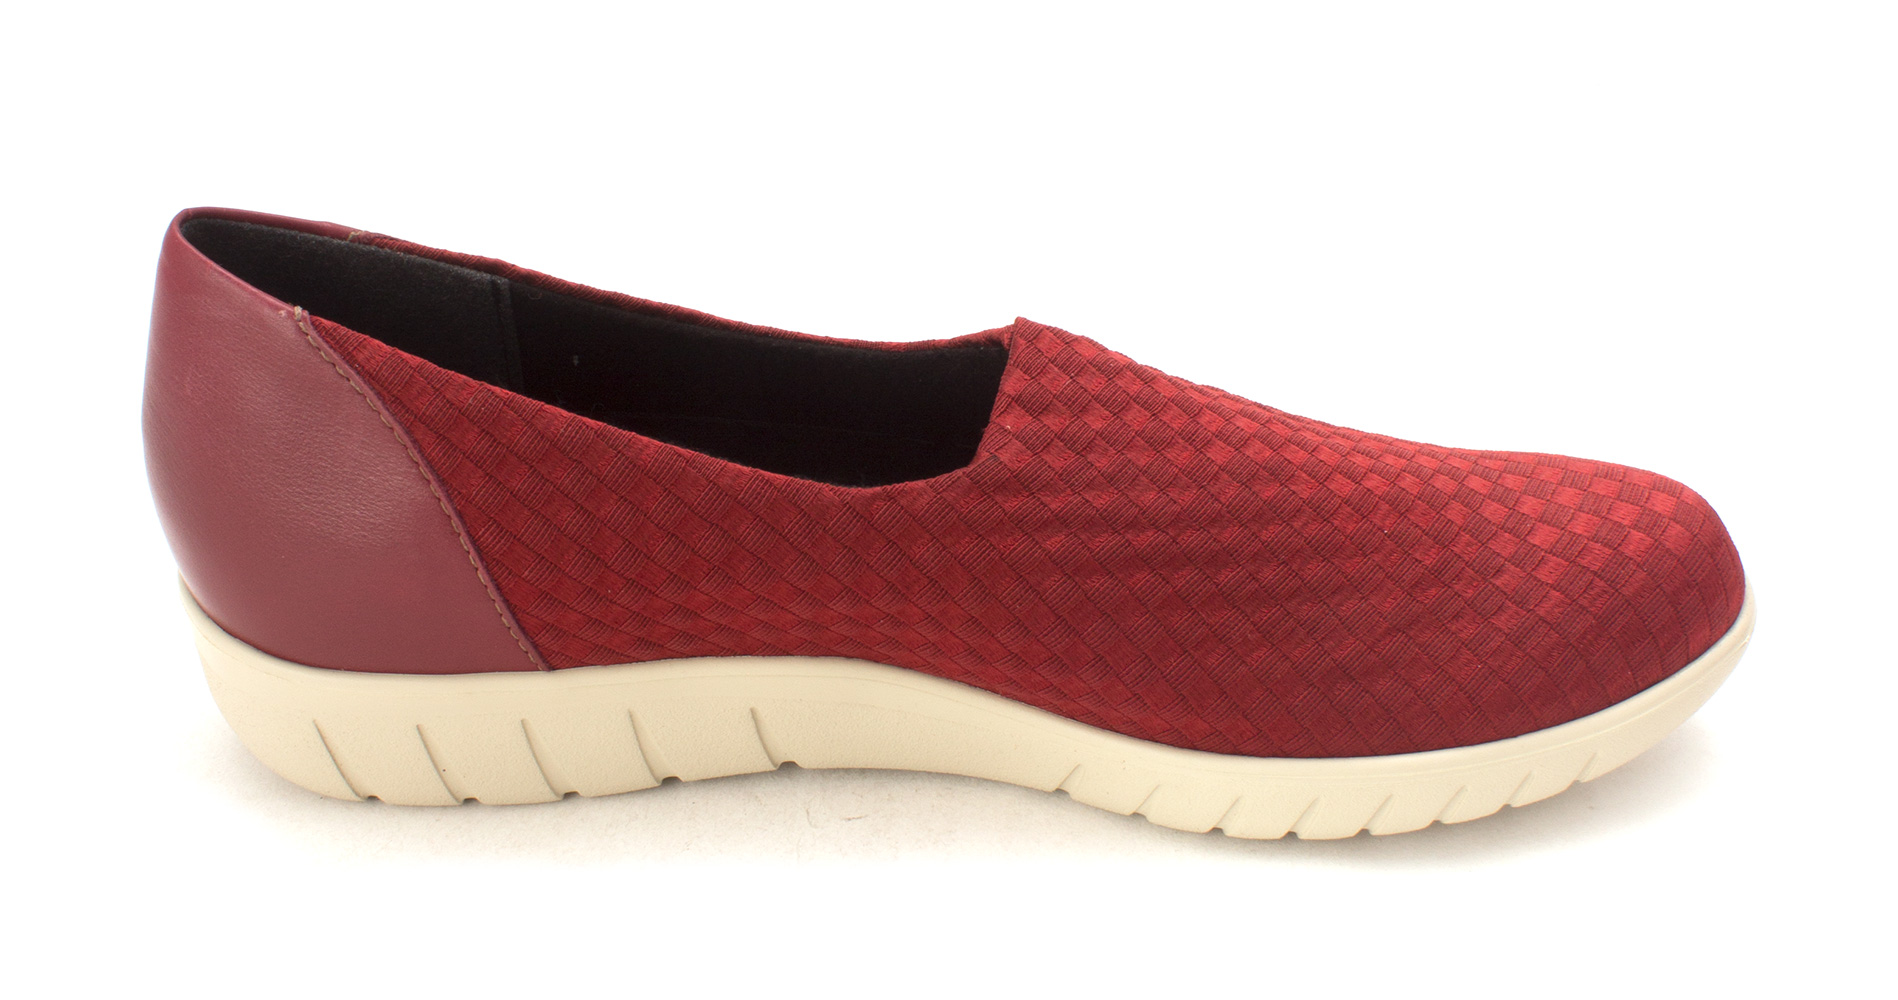 Munro Womens Fashion Sneakers in Red Color, Size 6 AHL 720422333271 | eBay